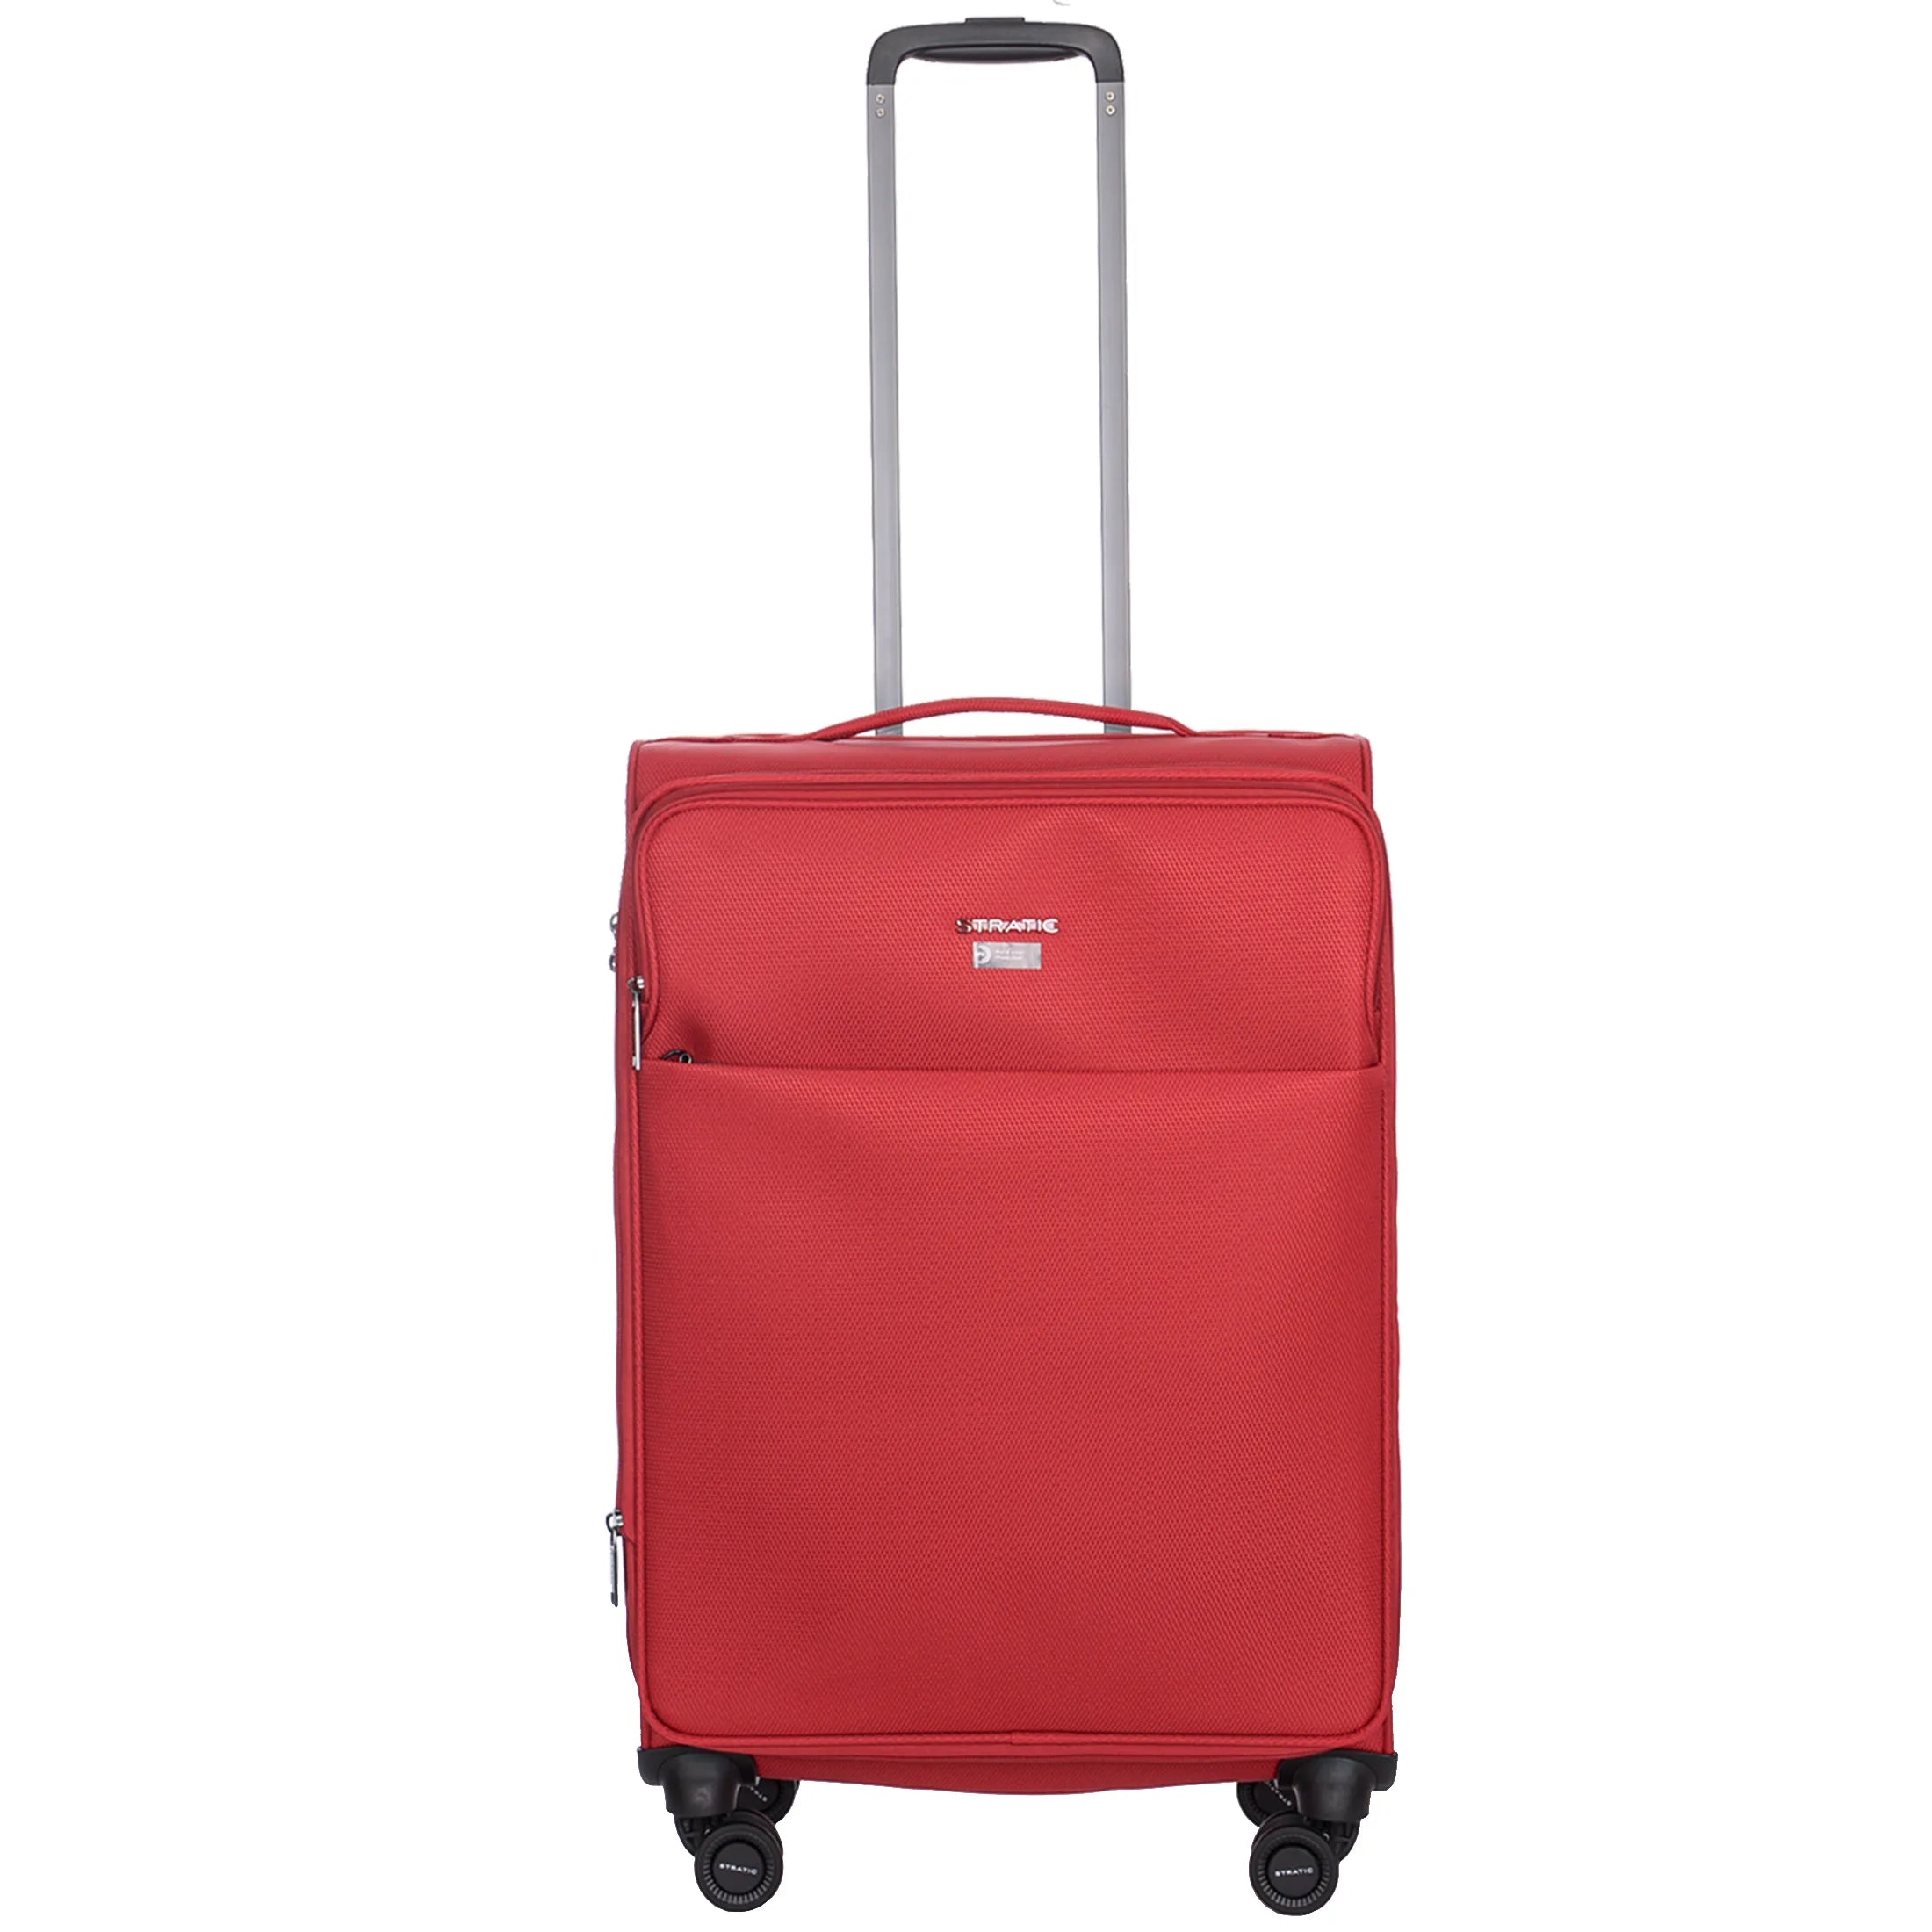 Stratic Light + trolley 4 roues 68 cm - Rouge